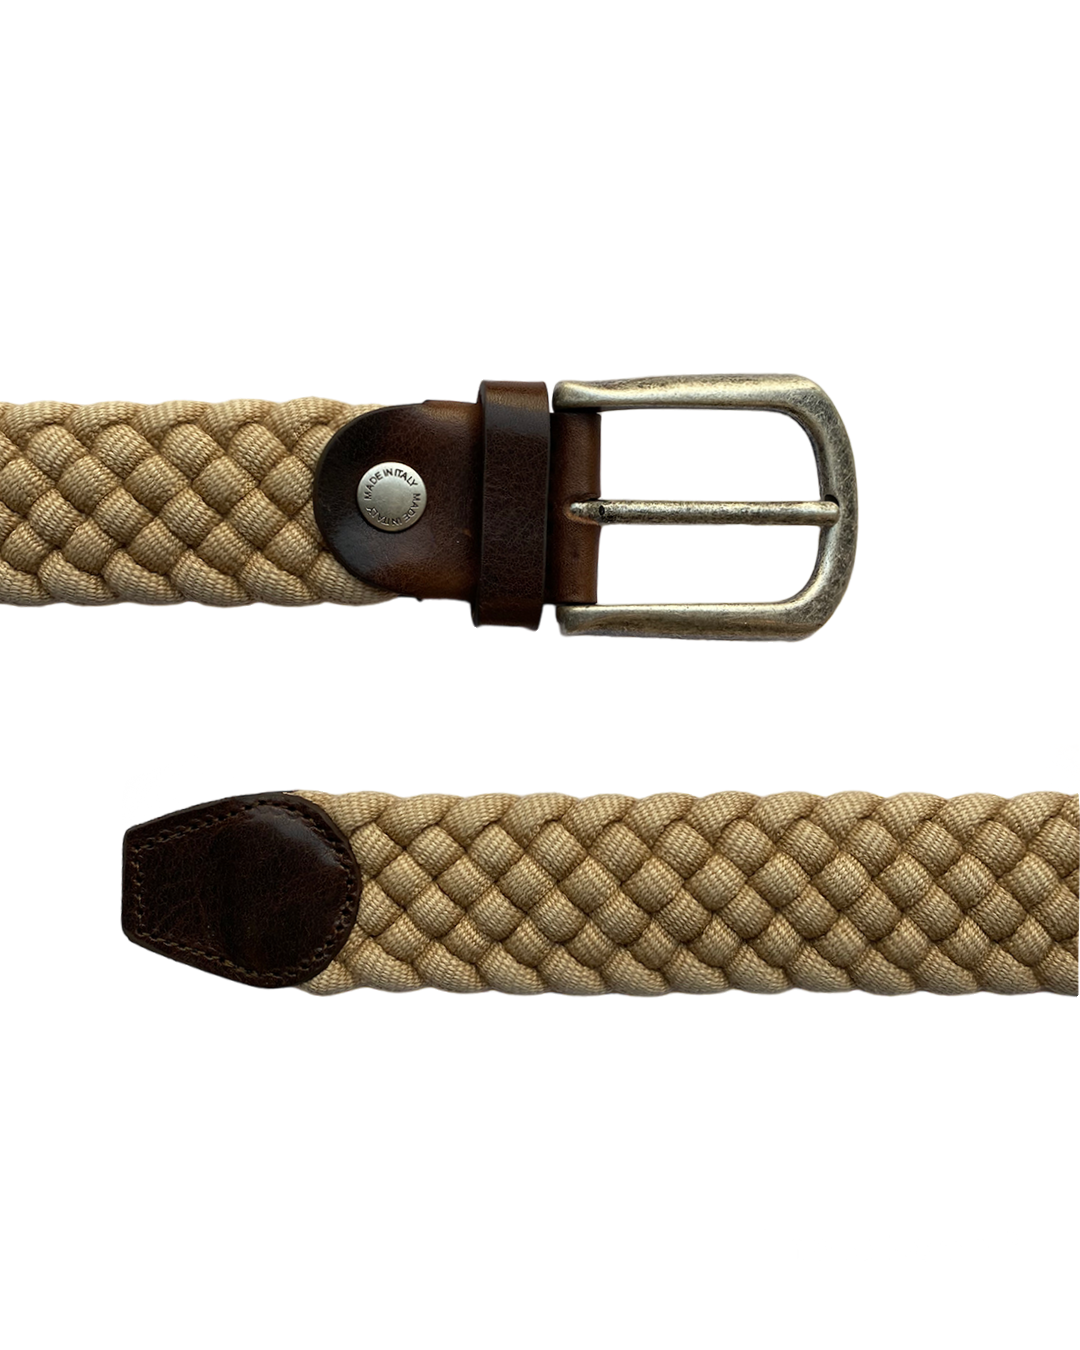 BRAIDED ROPE BELT IN NATURAL SAND COLOUR